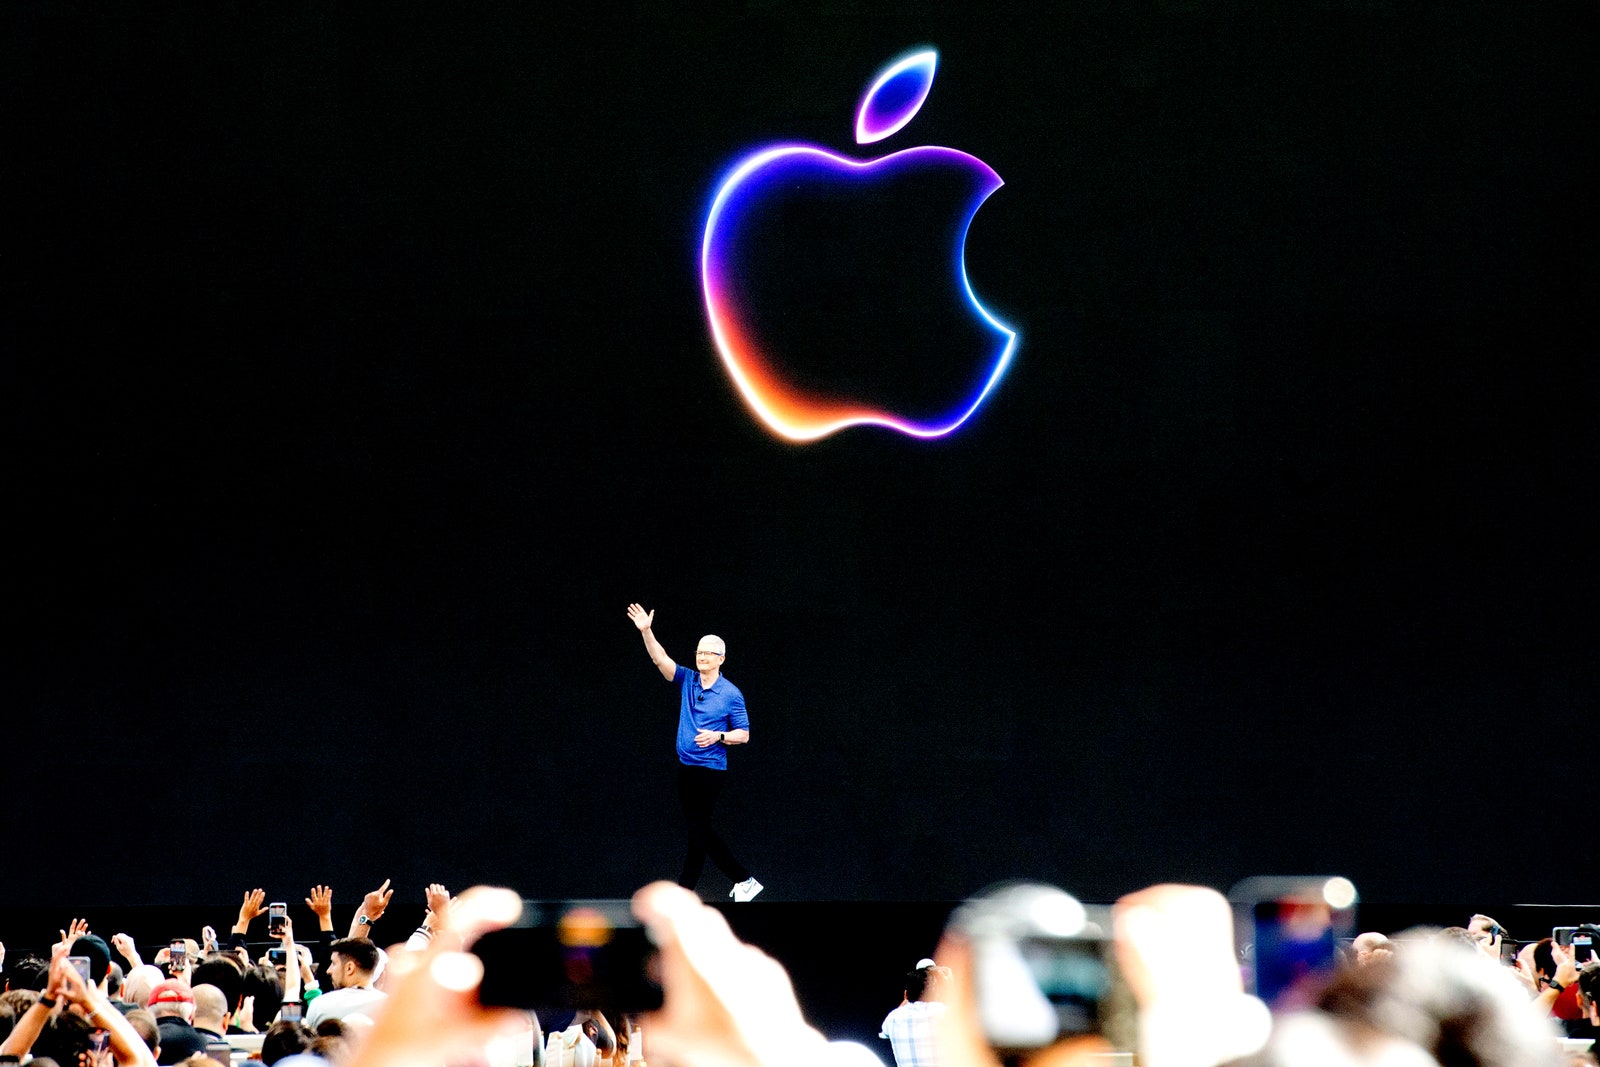 Tim Cook CEO of Apple speaks during an announcement of new products at the WWDC developer conference